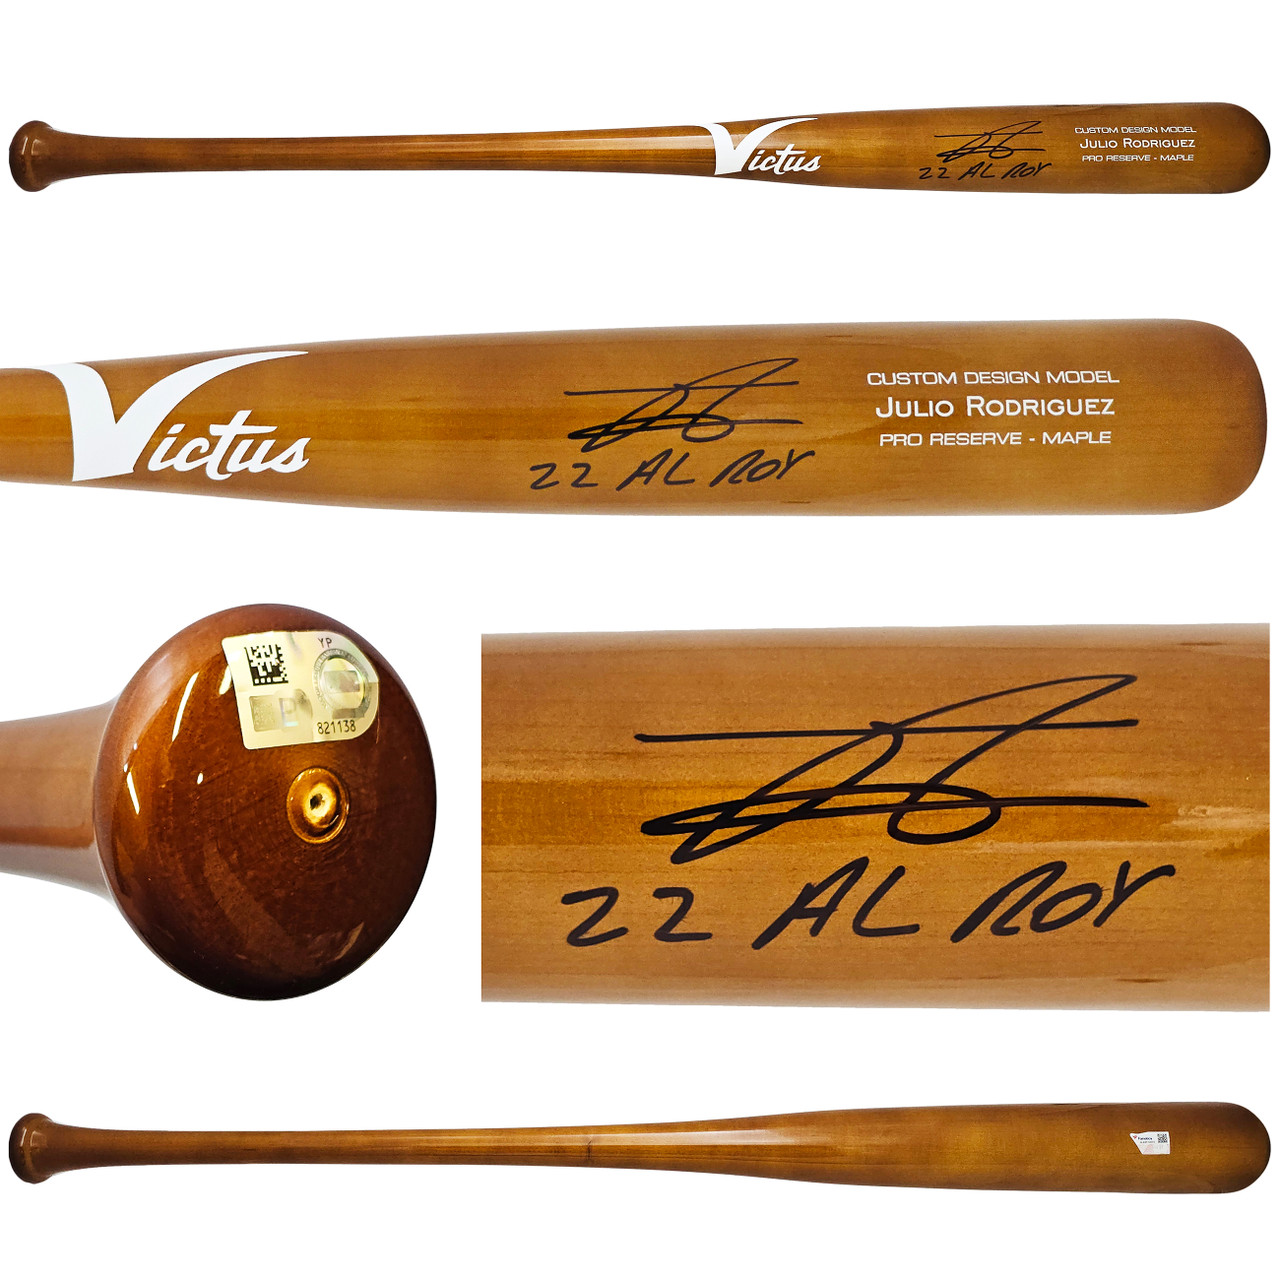 Julio Rodriguez Autographed Brown Victus Pro Reserve Maple Bat Seattle  Mariners 22 AL ROY Fanatics and MLB Holo Stock #220500